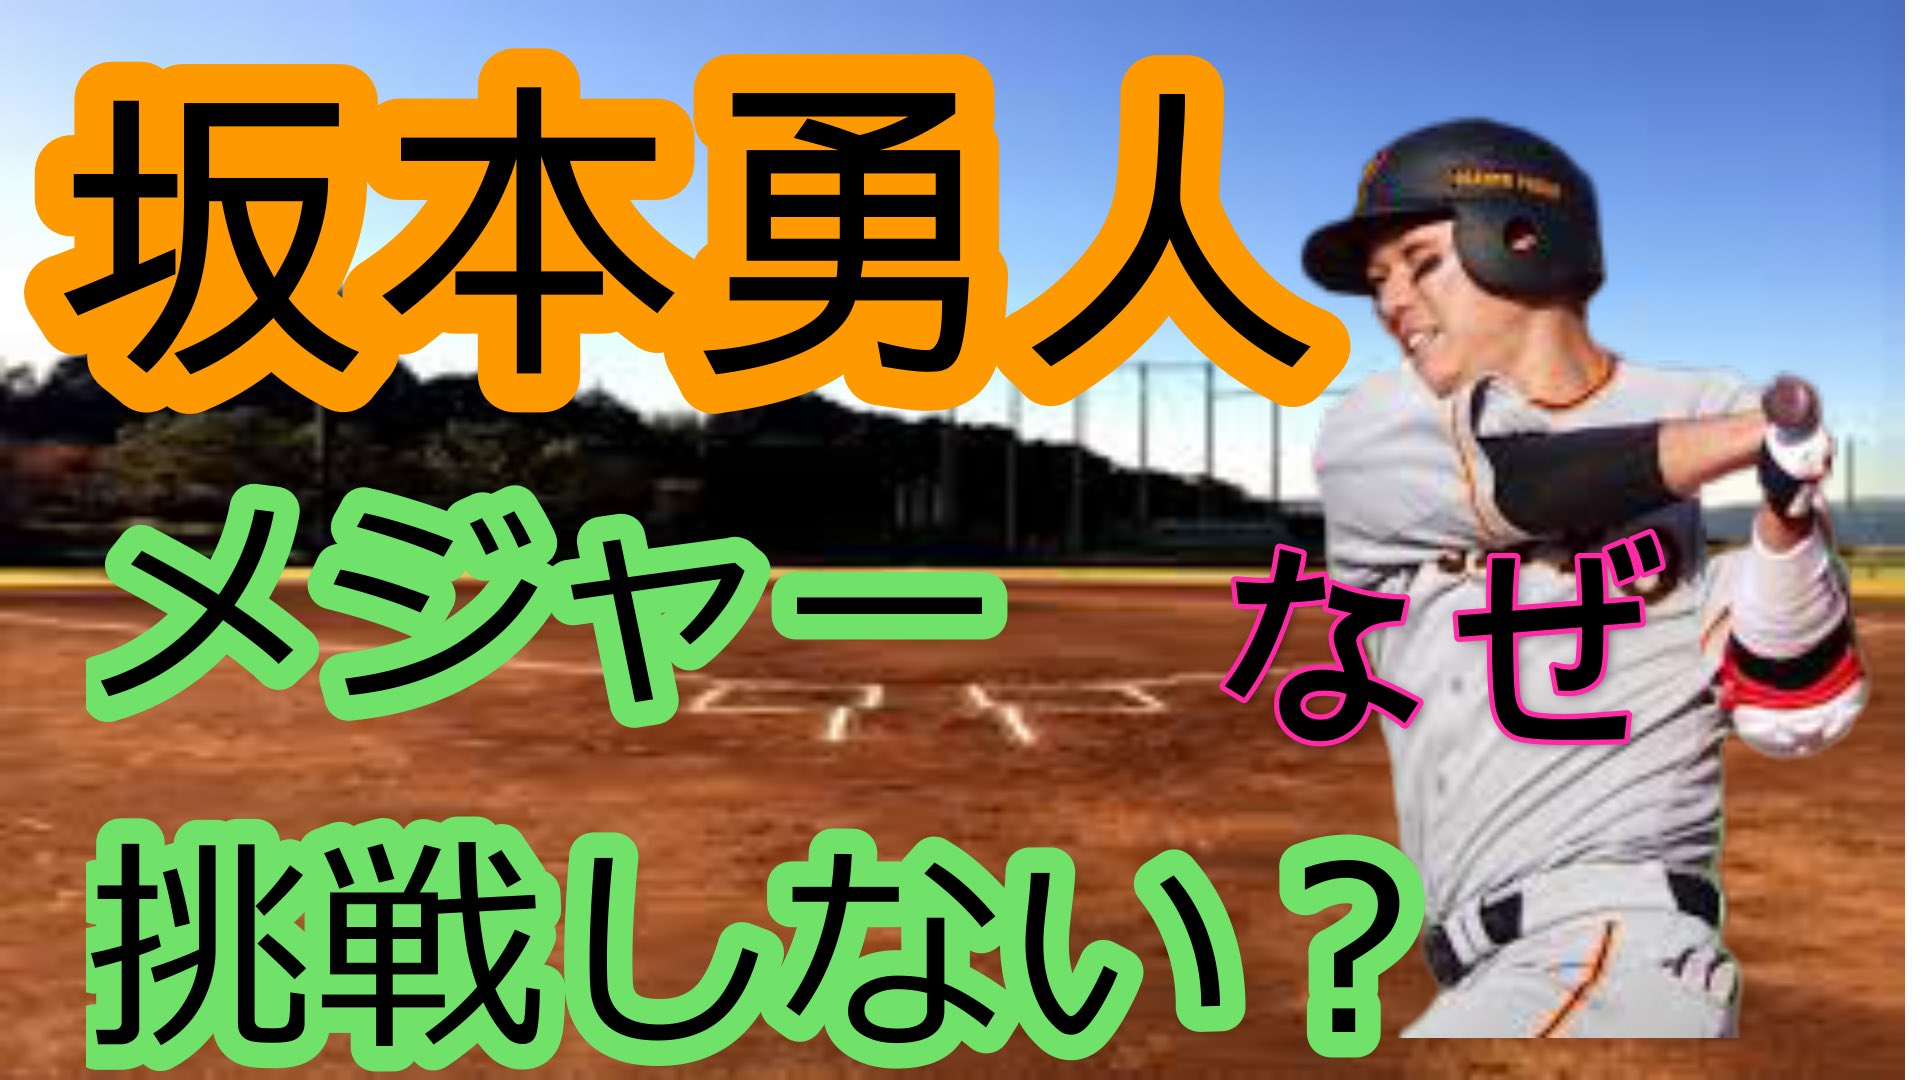 Tweets With Replies By 坂本勇人 画像 名言集 Hayatocup Twitter